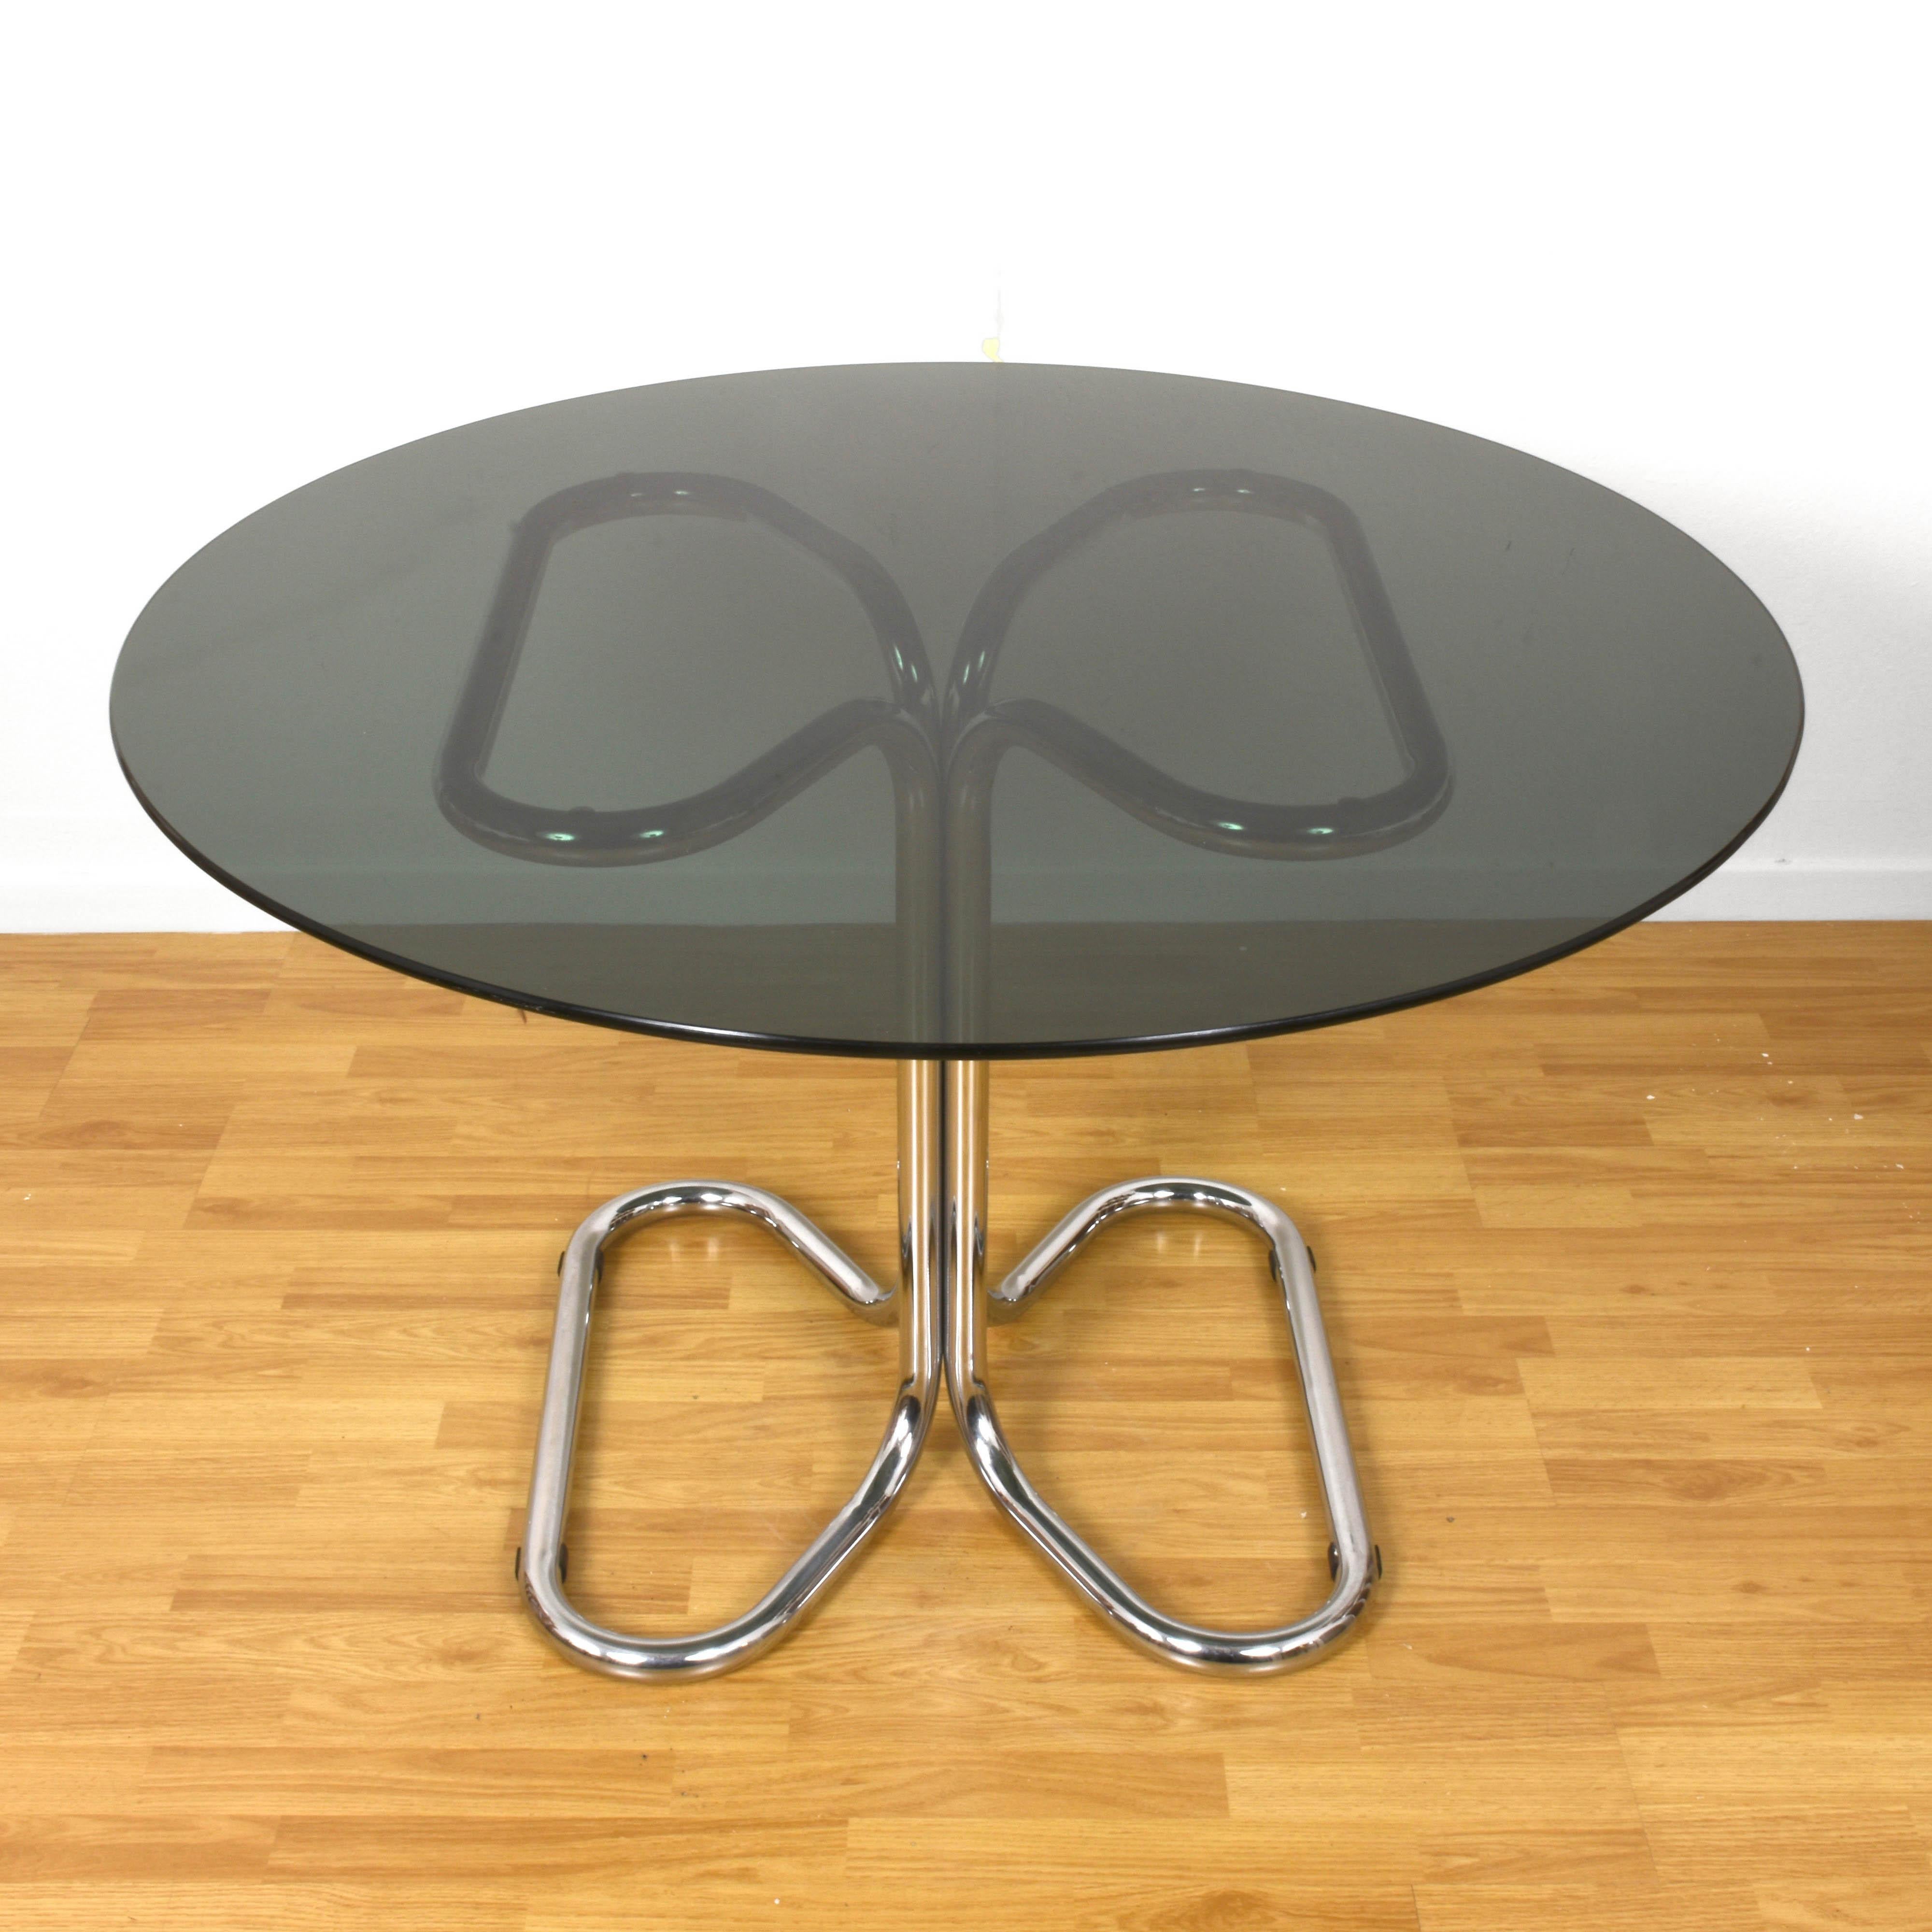 Italian dining table, Giotto Stoppino. Chromed metal base, smoked glass top. Measure: Diameter 118 cm.